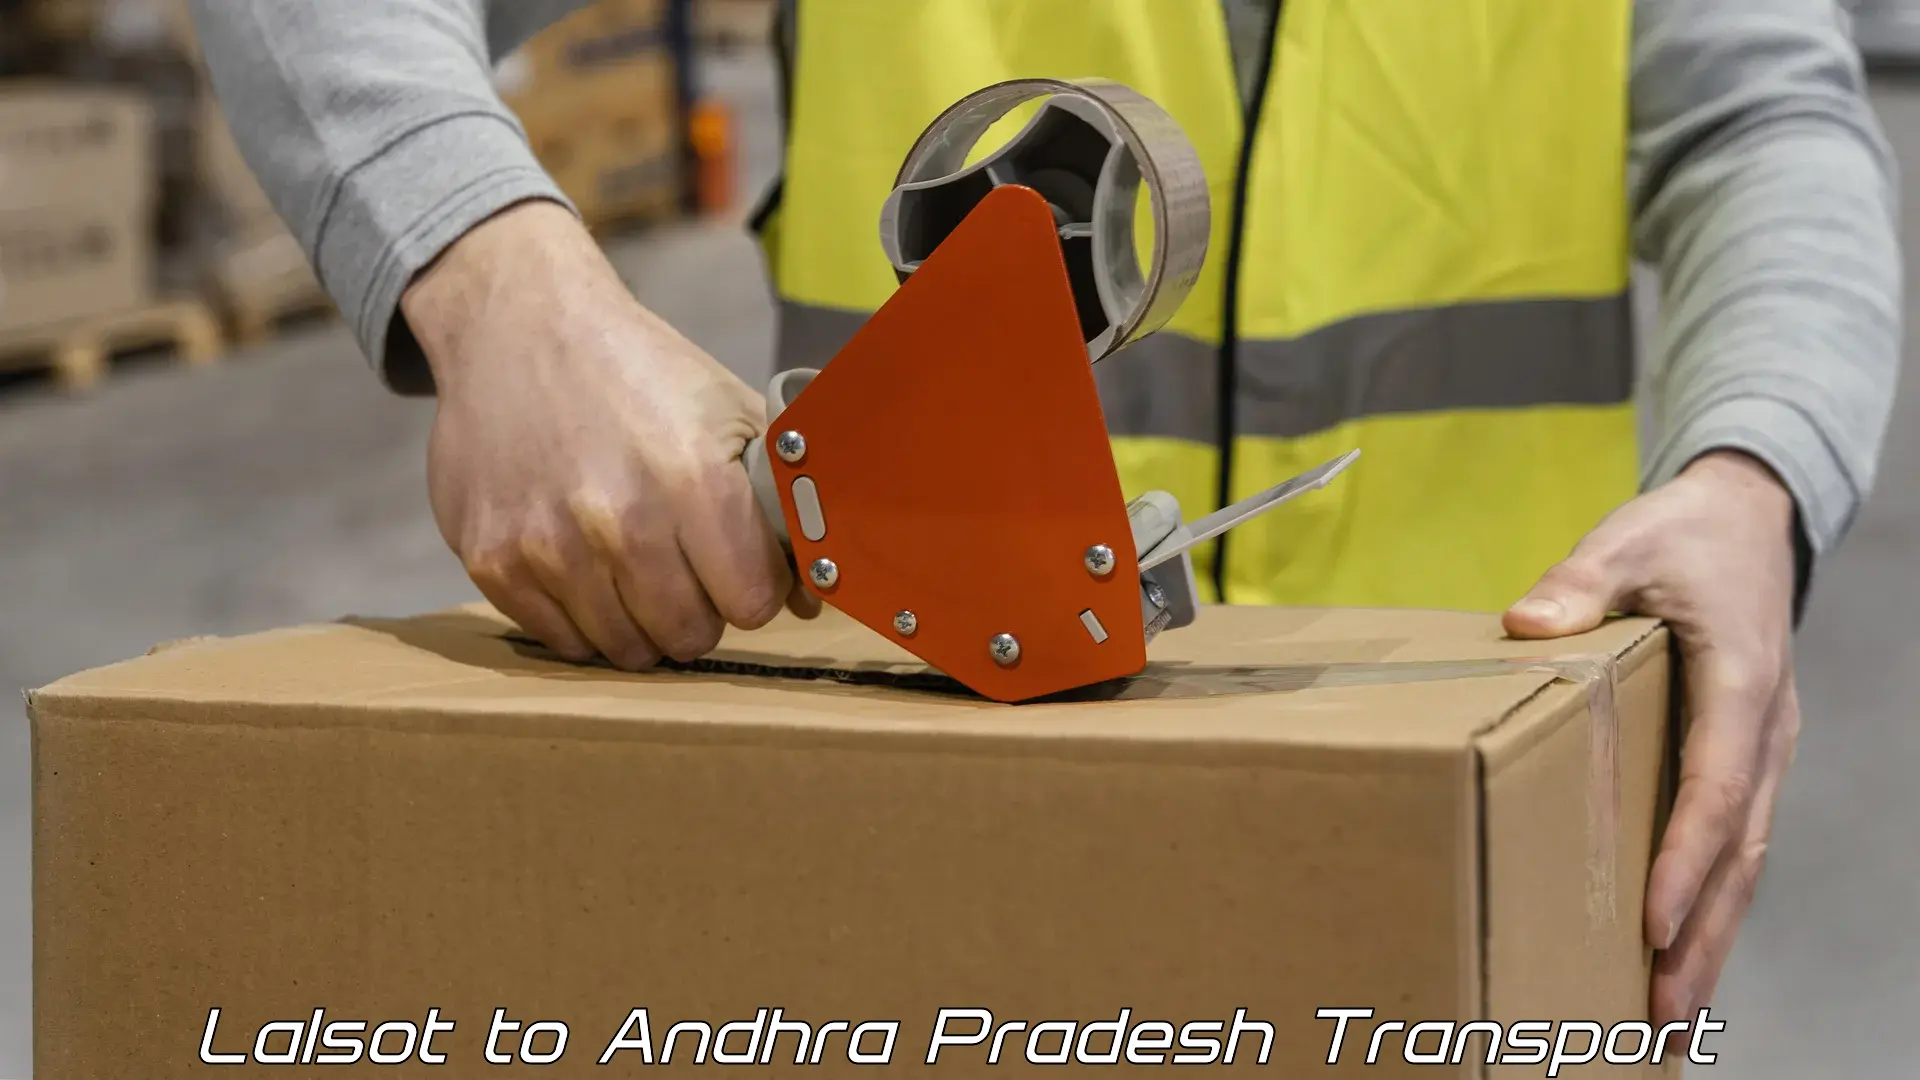 Delivery service Lalsot to Andhra Pradesh